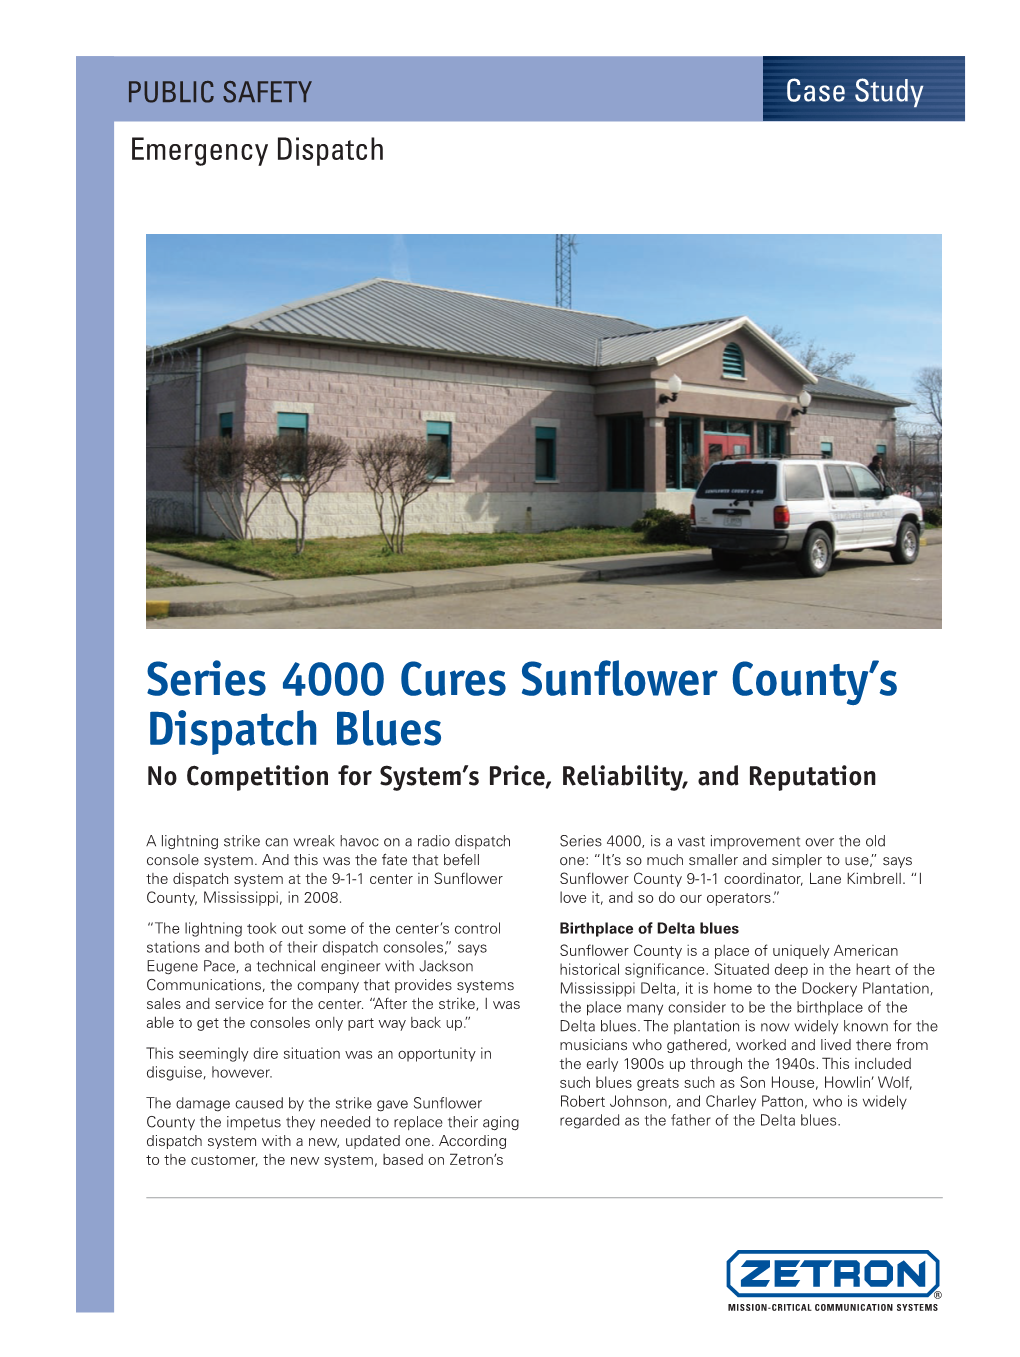 Series 4000 Cures Sunflower County's Dispatch Blues